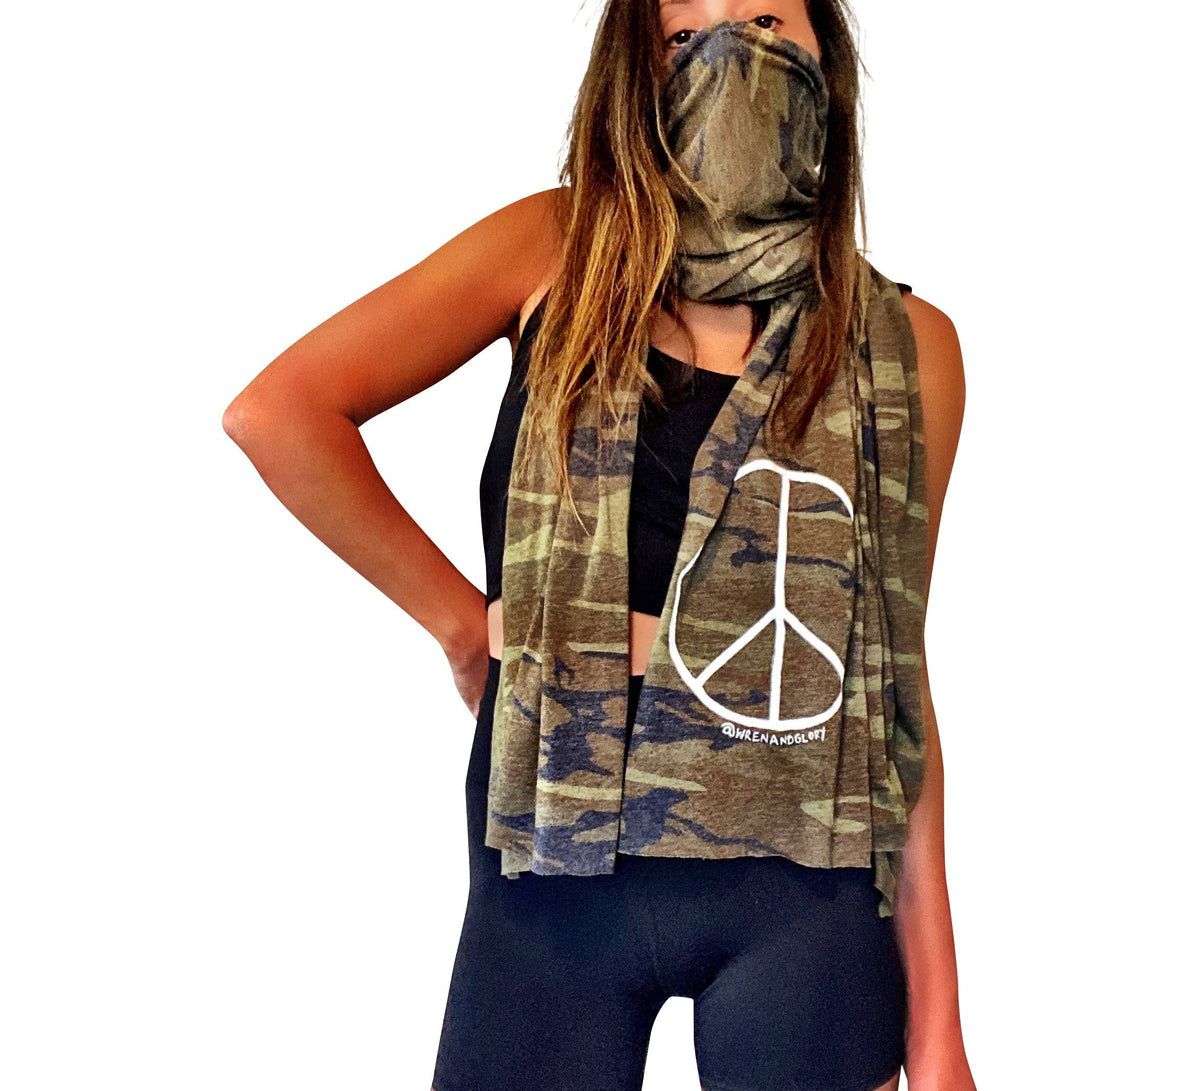 'PEACE OUT' PAINTED SCARF / FACE COVERING